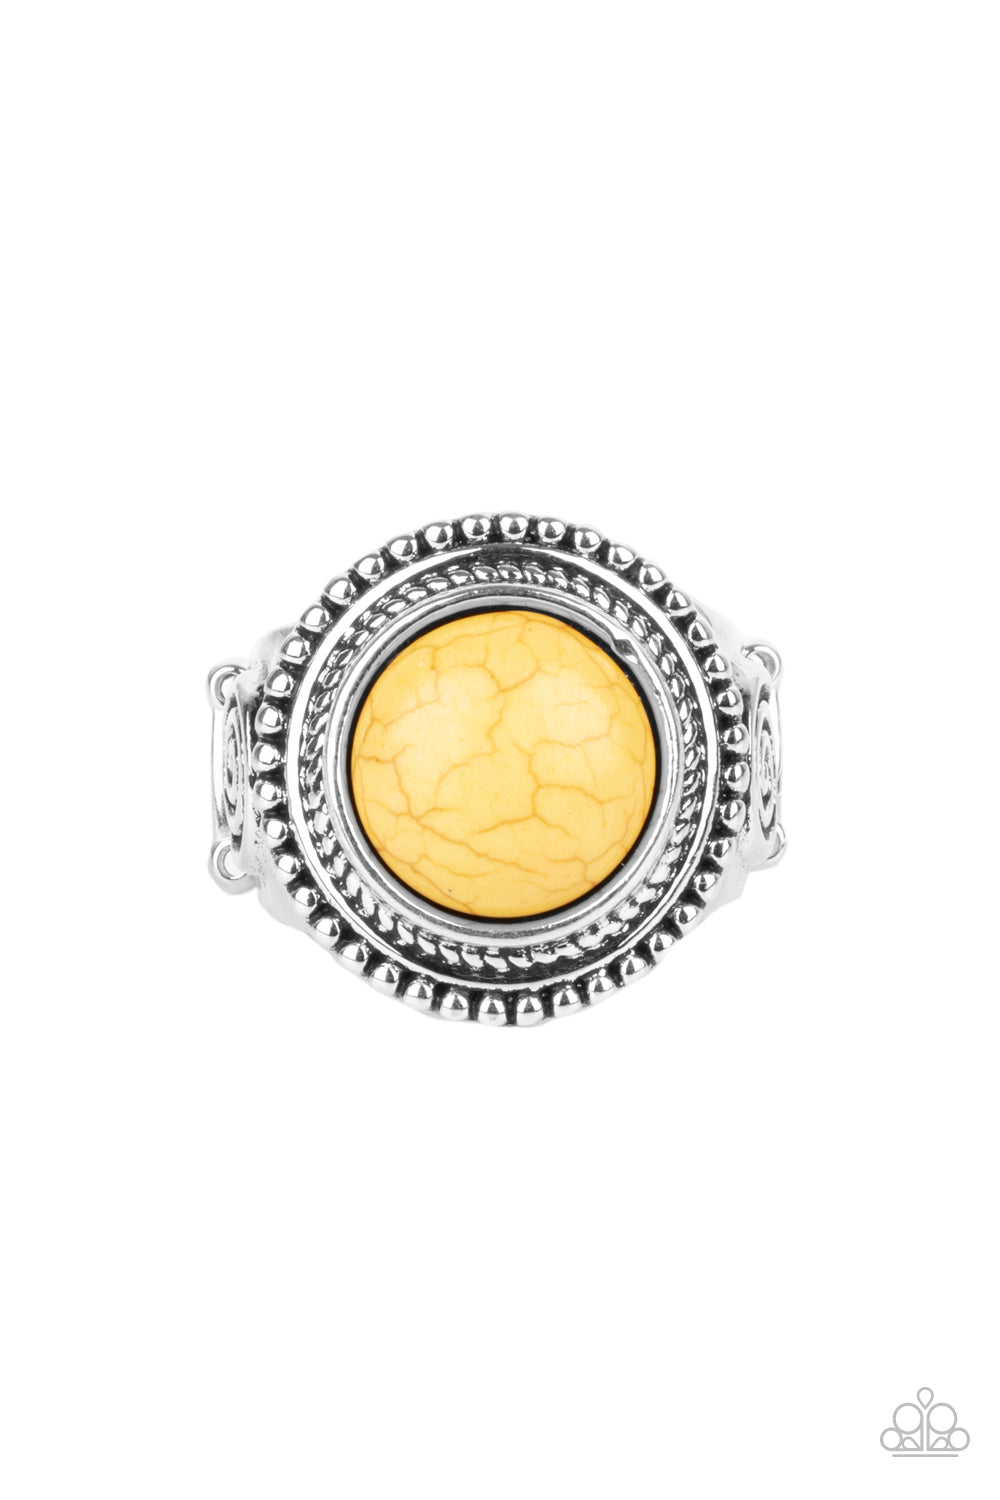 Evolutionary Essence - Yellow and Silver Ring - Paparazzi Accessories -
A round yellow stone is pressed into the center of a studded silver frame embossed with rustic swirls, creating a trendy tribal inspired centerpiece atop the finger. Features a stretchy band for a flexible fit. Sold as one individual ring.
